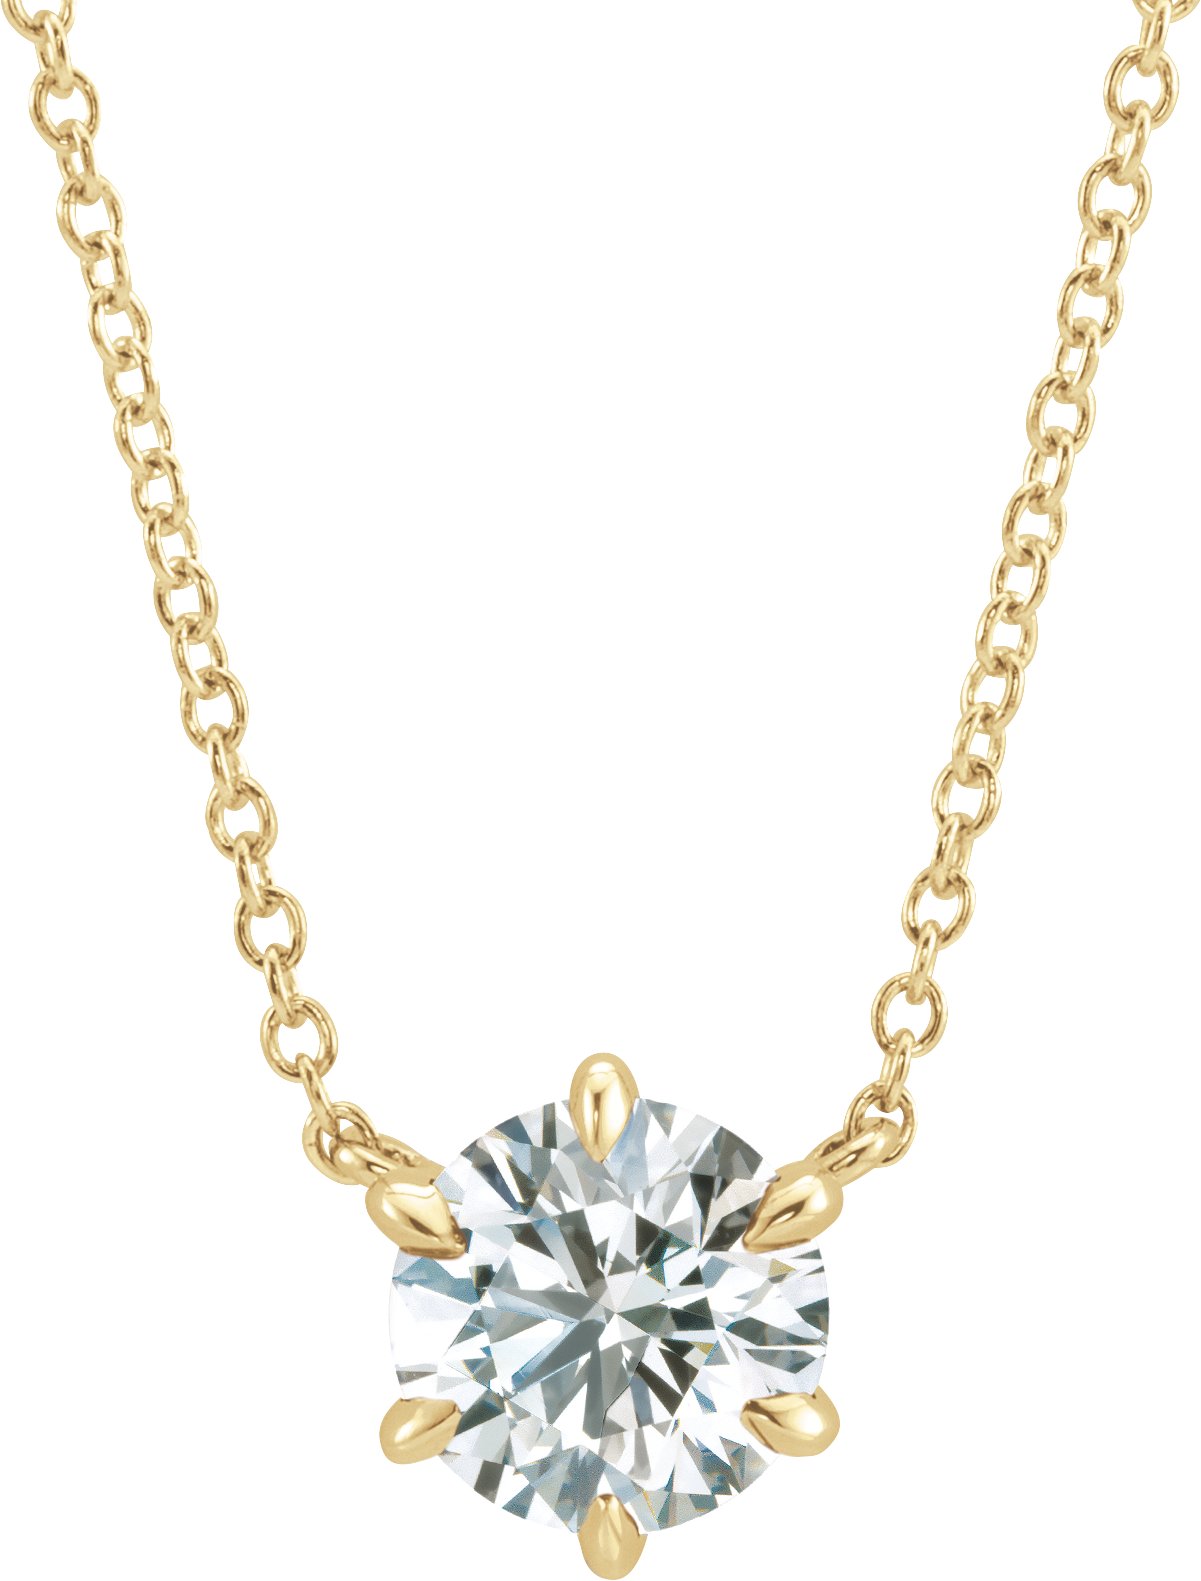 14K Yellow 1/4 CT Diamond Solitaire 16" Necklace  